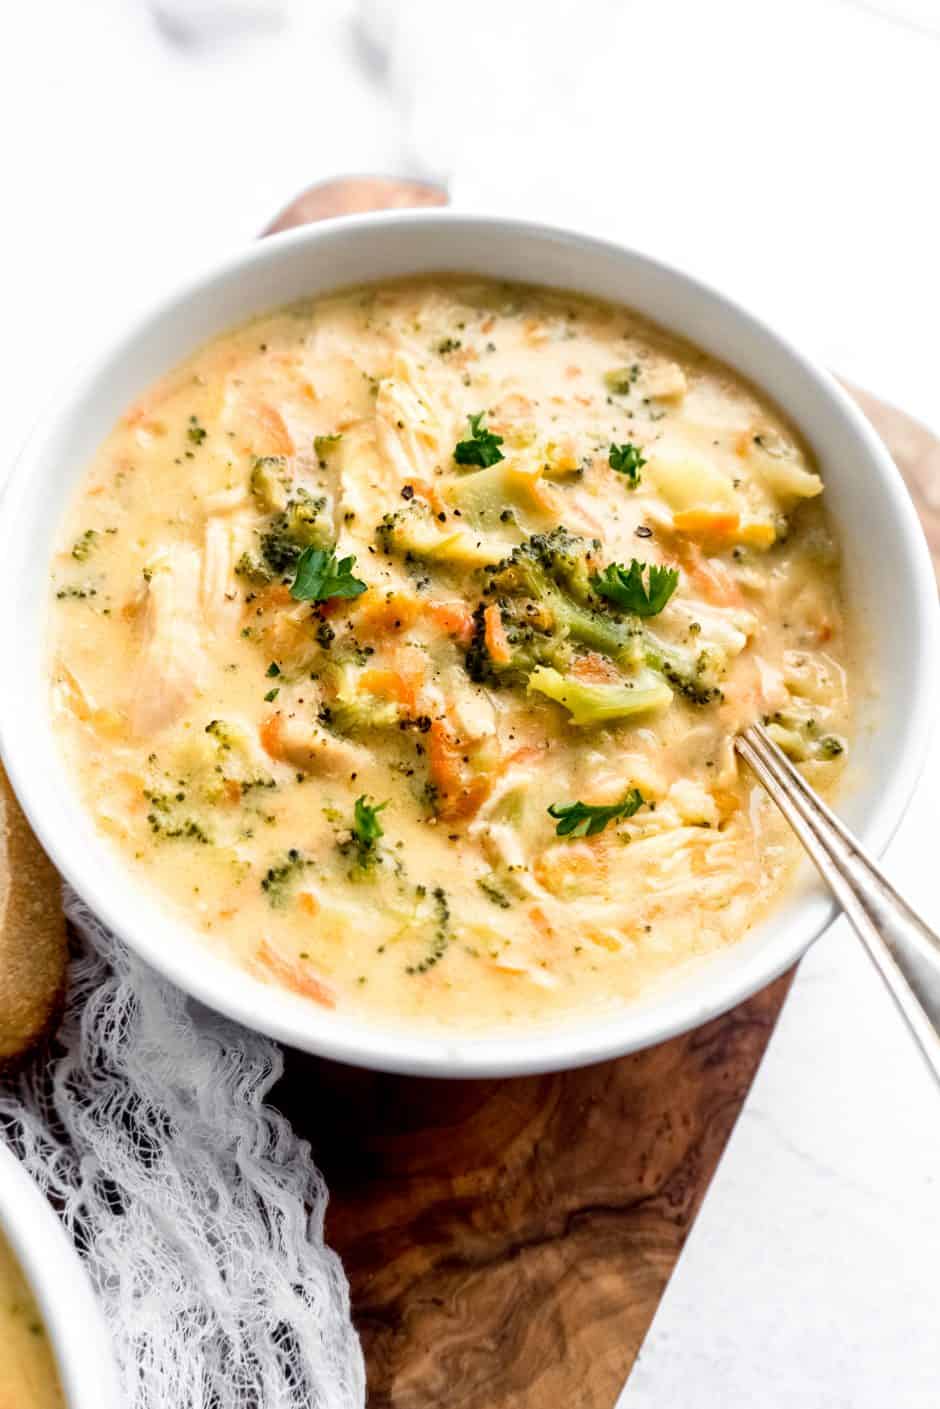 Instant Pot Broccoli Cheddar Chicken Soup - The Windy City Dinner Fairy